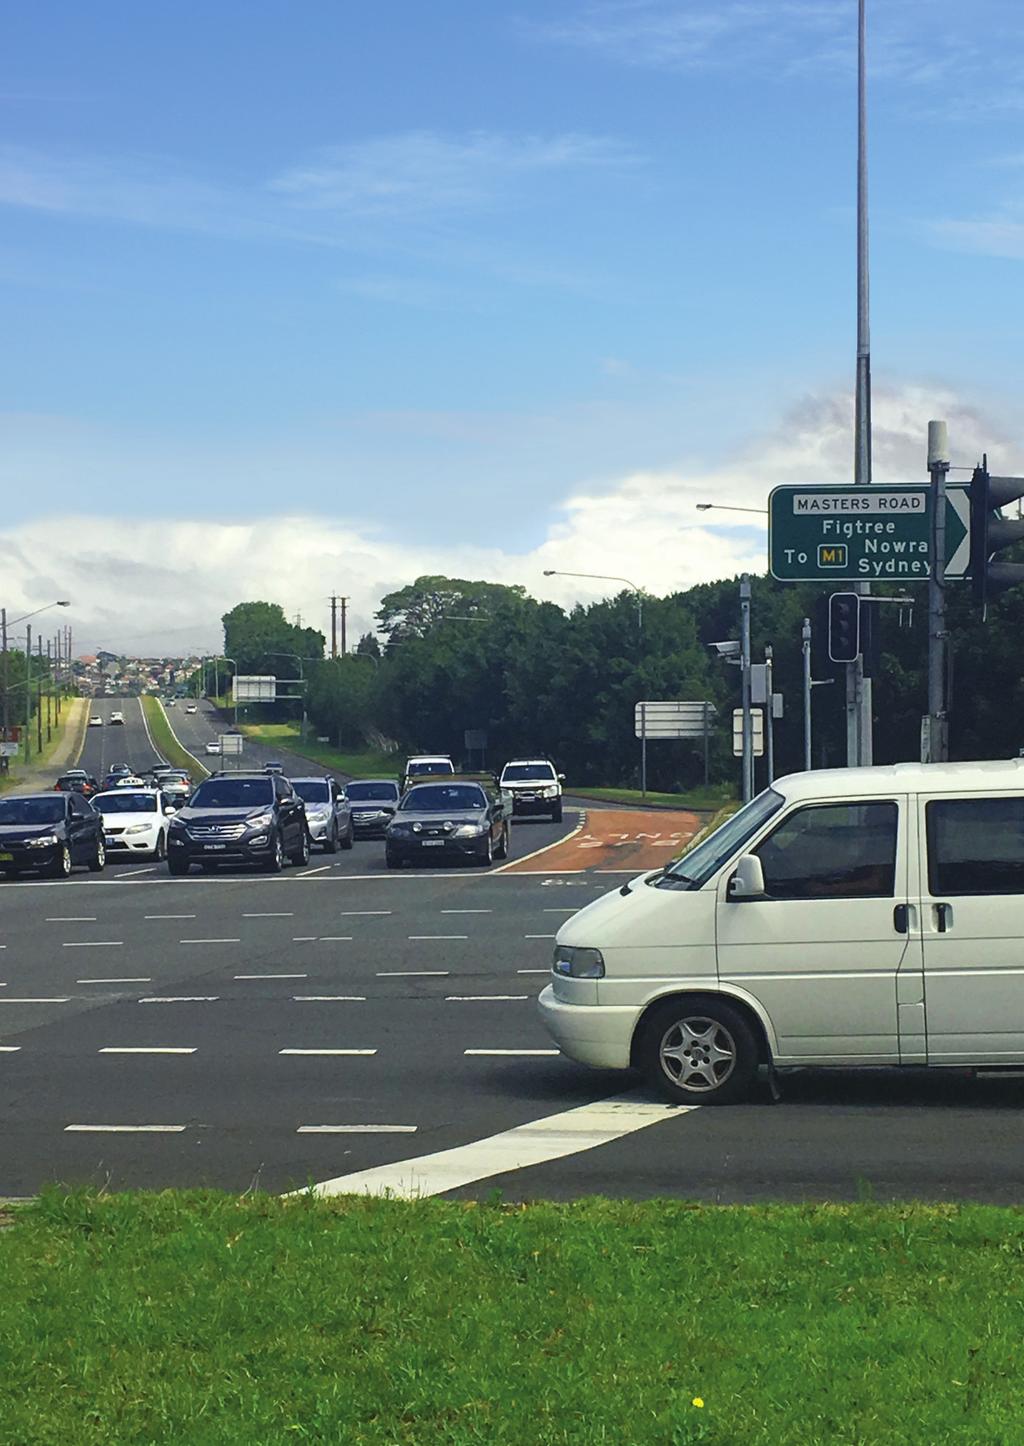 BUILD A NEW MASTERS & SPRINGHILL ROAD INTERCHANGE As part of Labor s plan to connect the Illawarra to south-west Sydney, it will commit to the construction of a new Masters & Springhill Roads